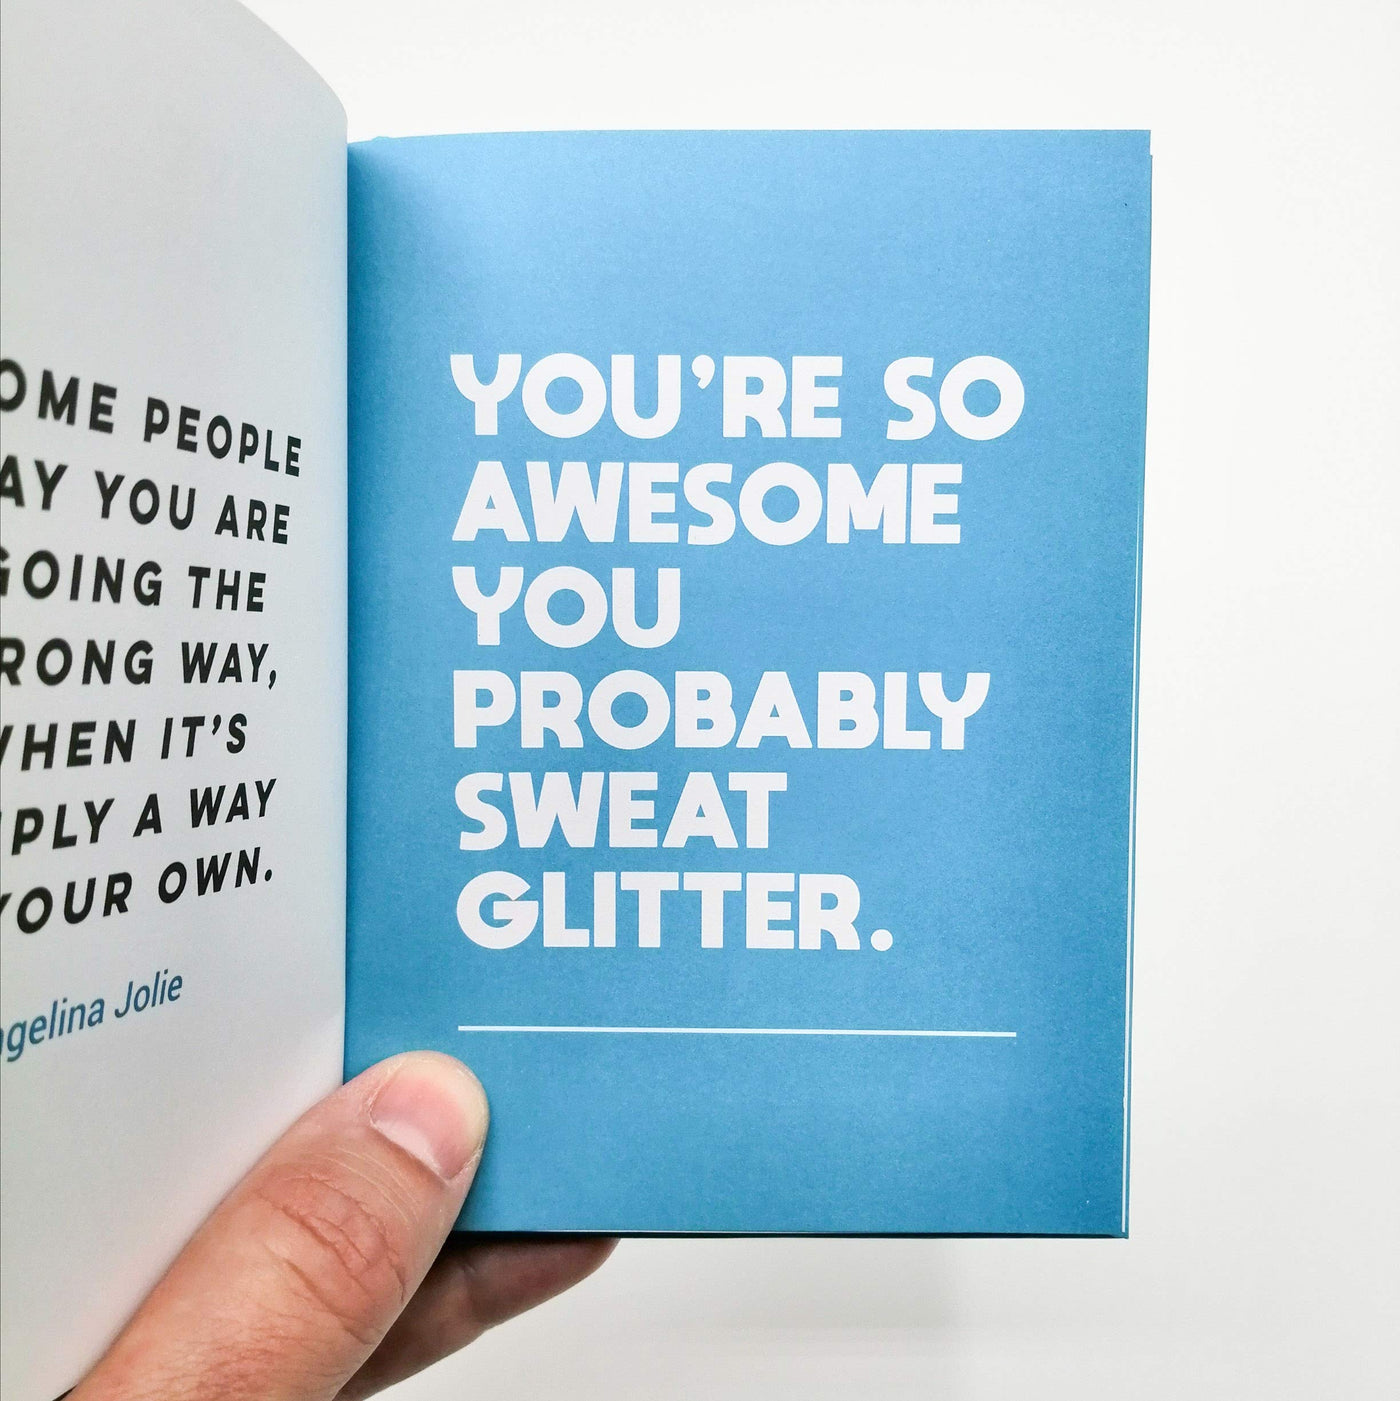 You're Awesome AF: Here's a Book